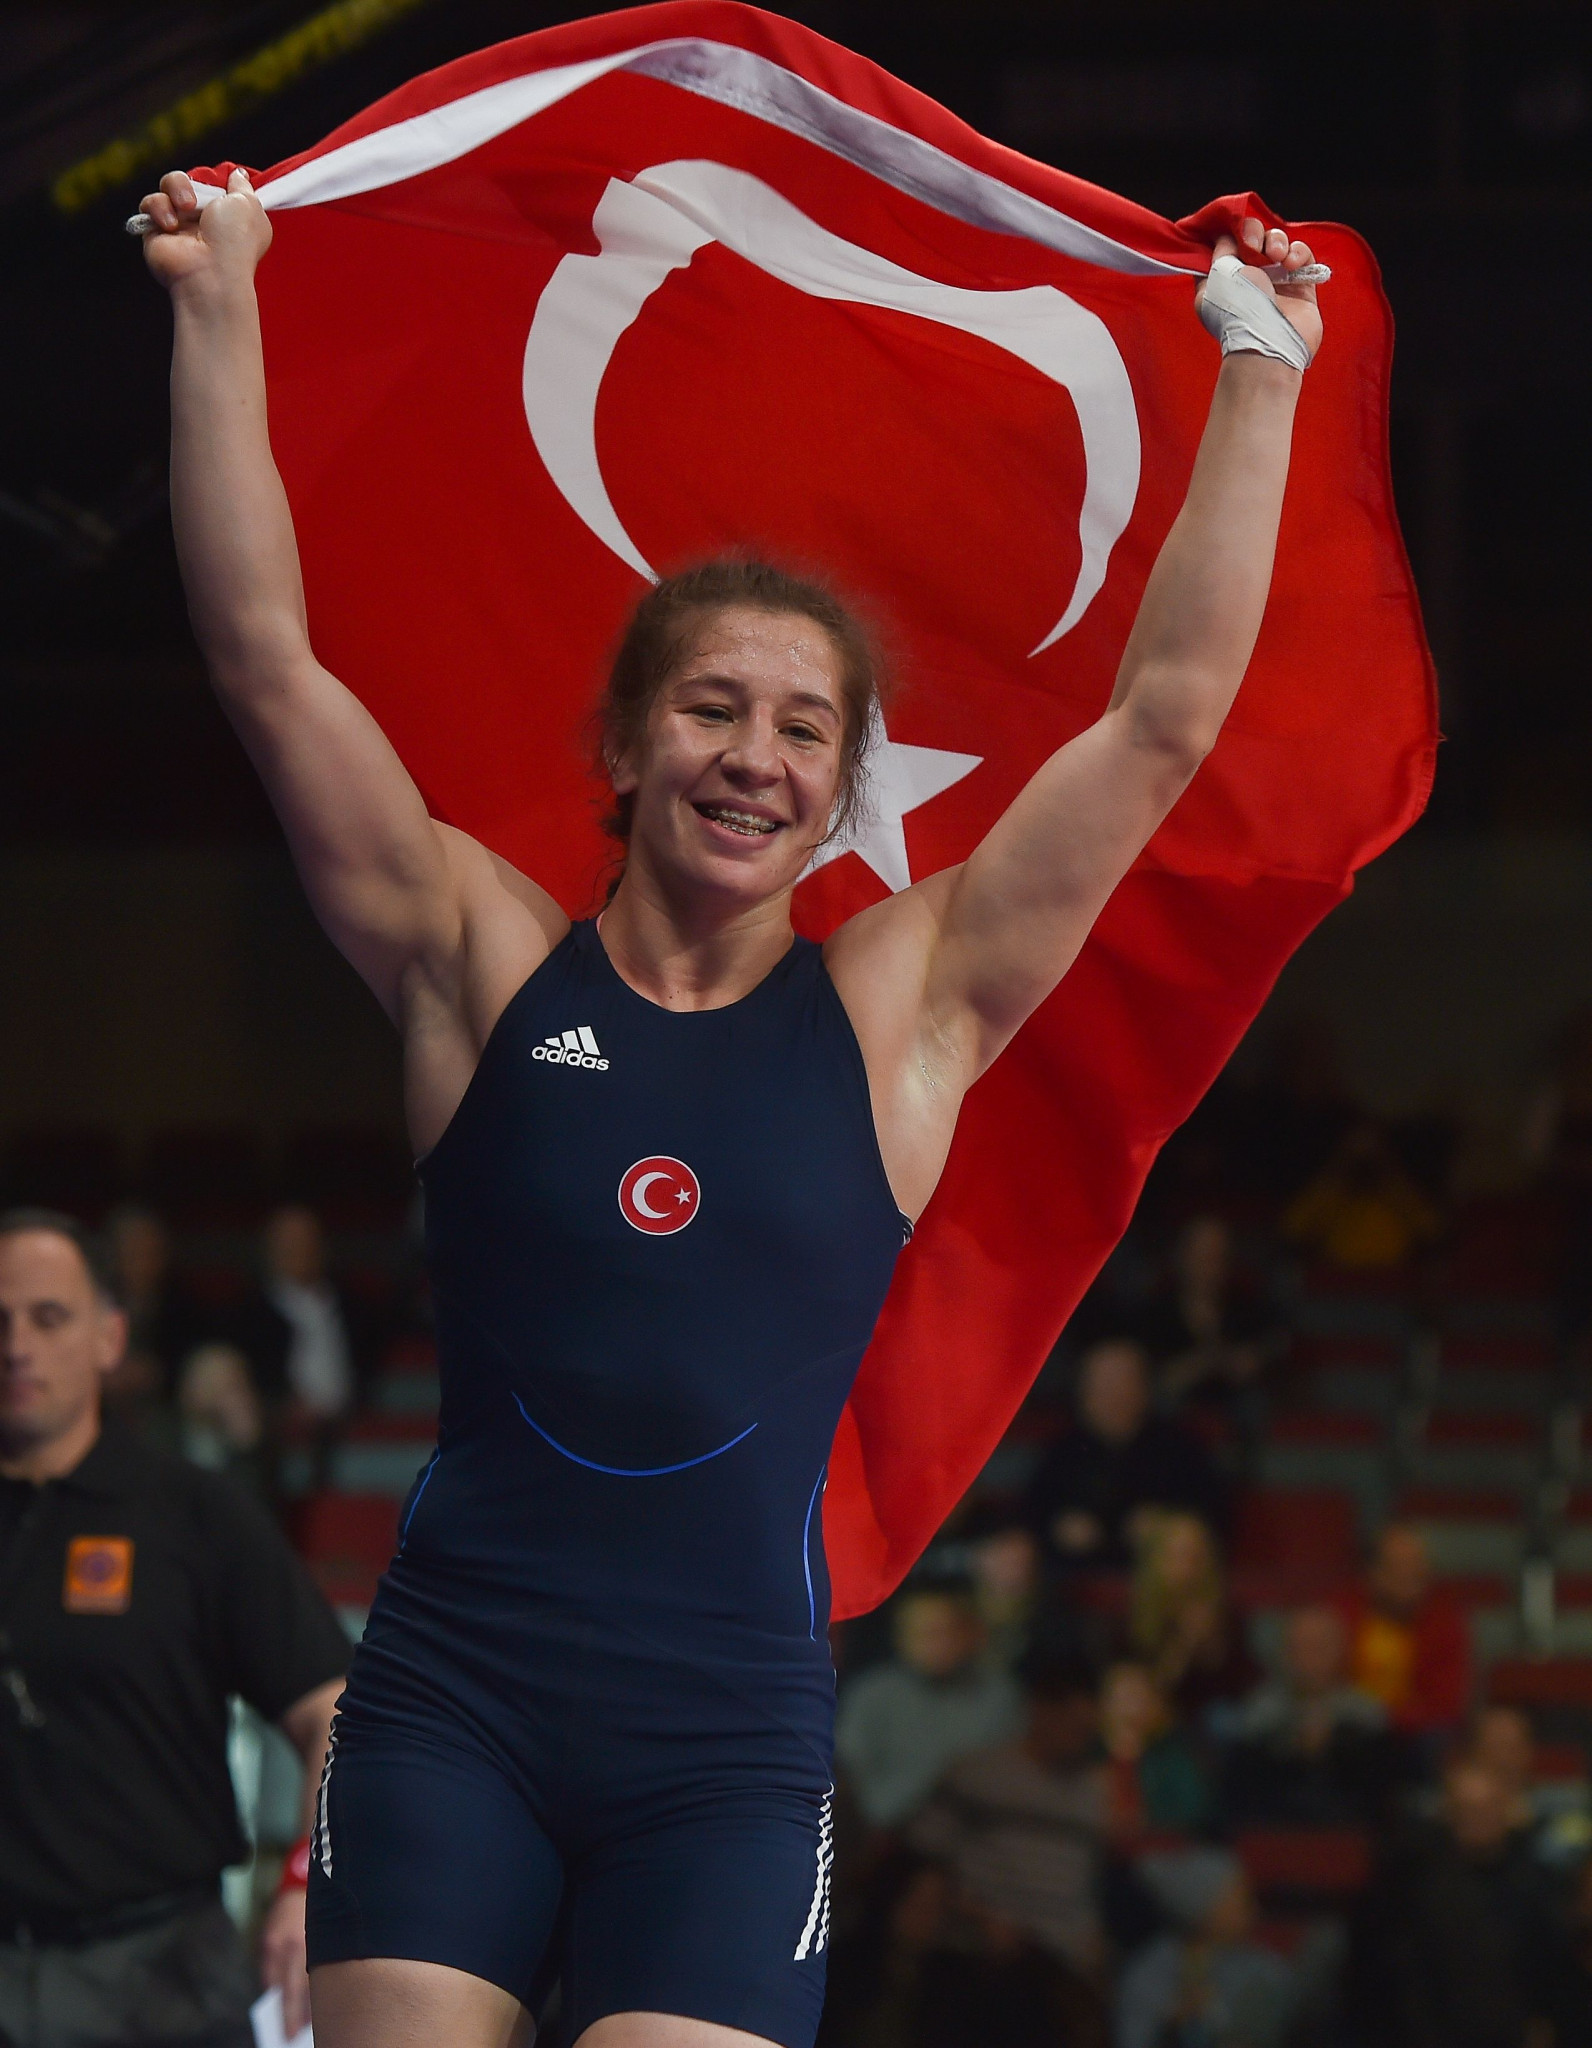 Turkey's Yasemin Adar, winner of the women's 75 kilogram class at the 2017 World Championships, is top seed ©Getty Images